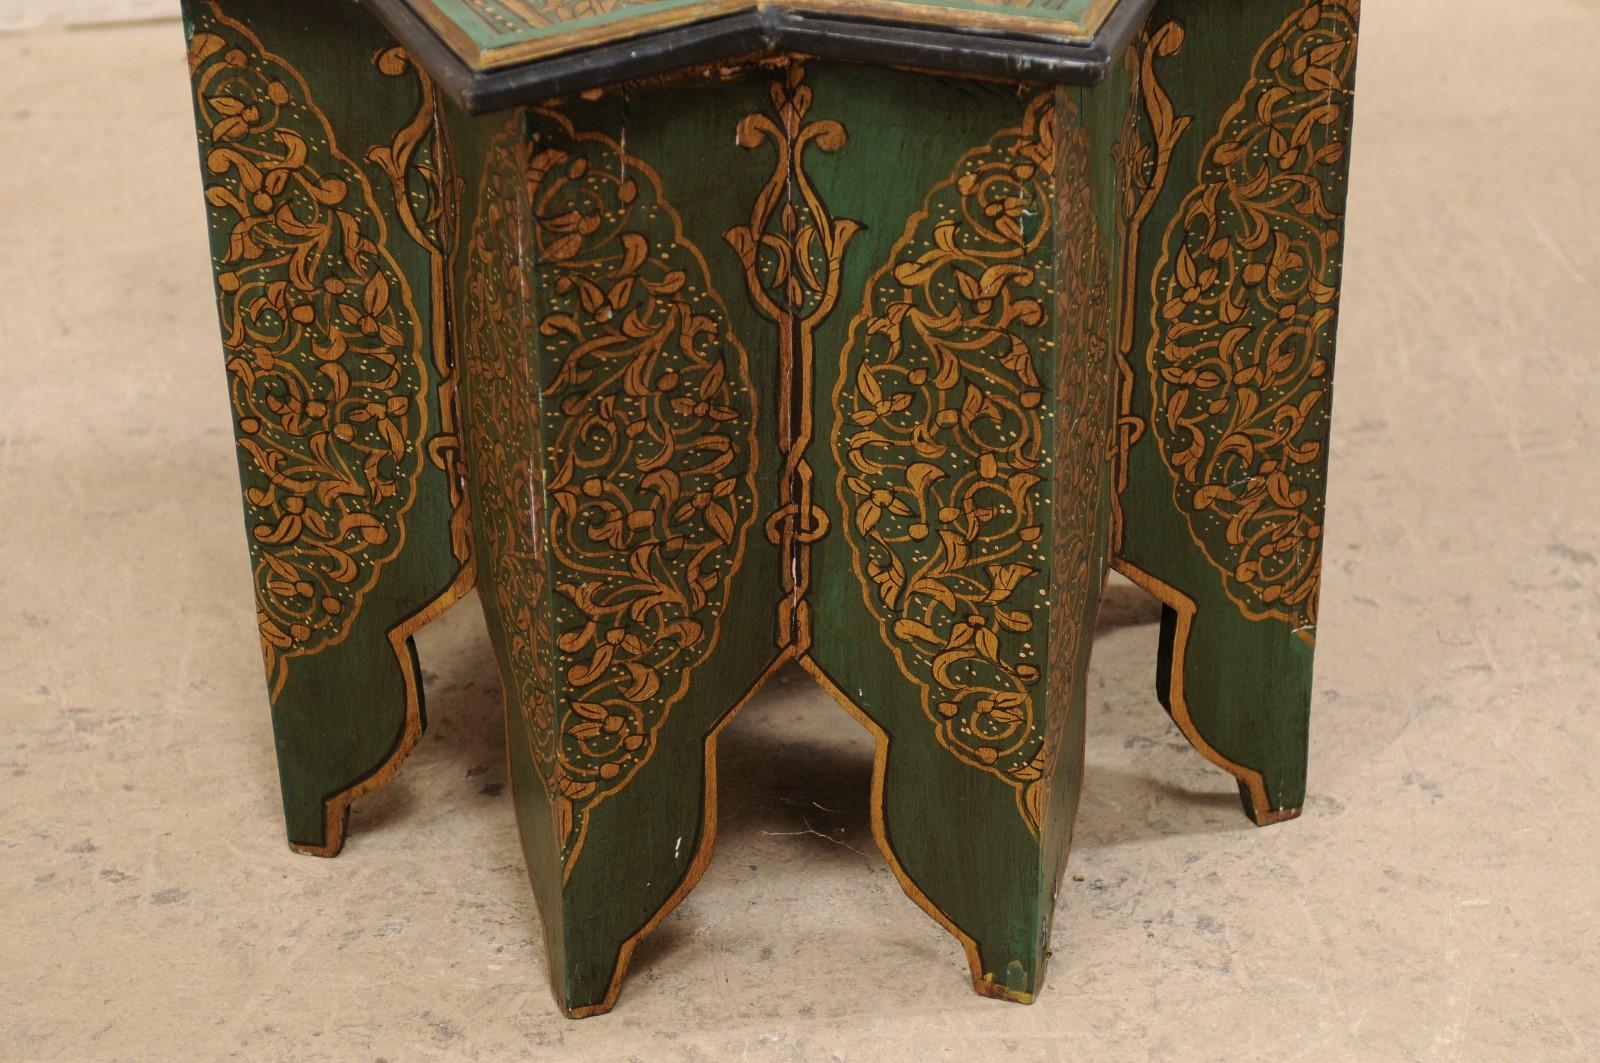 Hand-Painted Moroccan Morrish Star Shaped Tea or Side Table, in Green, Black and Gold